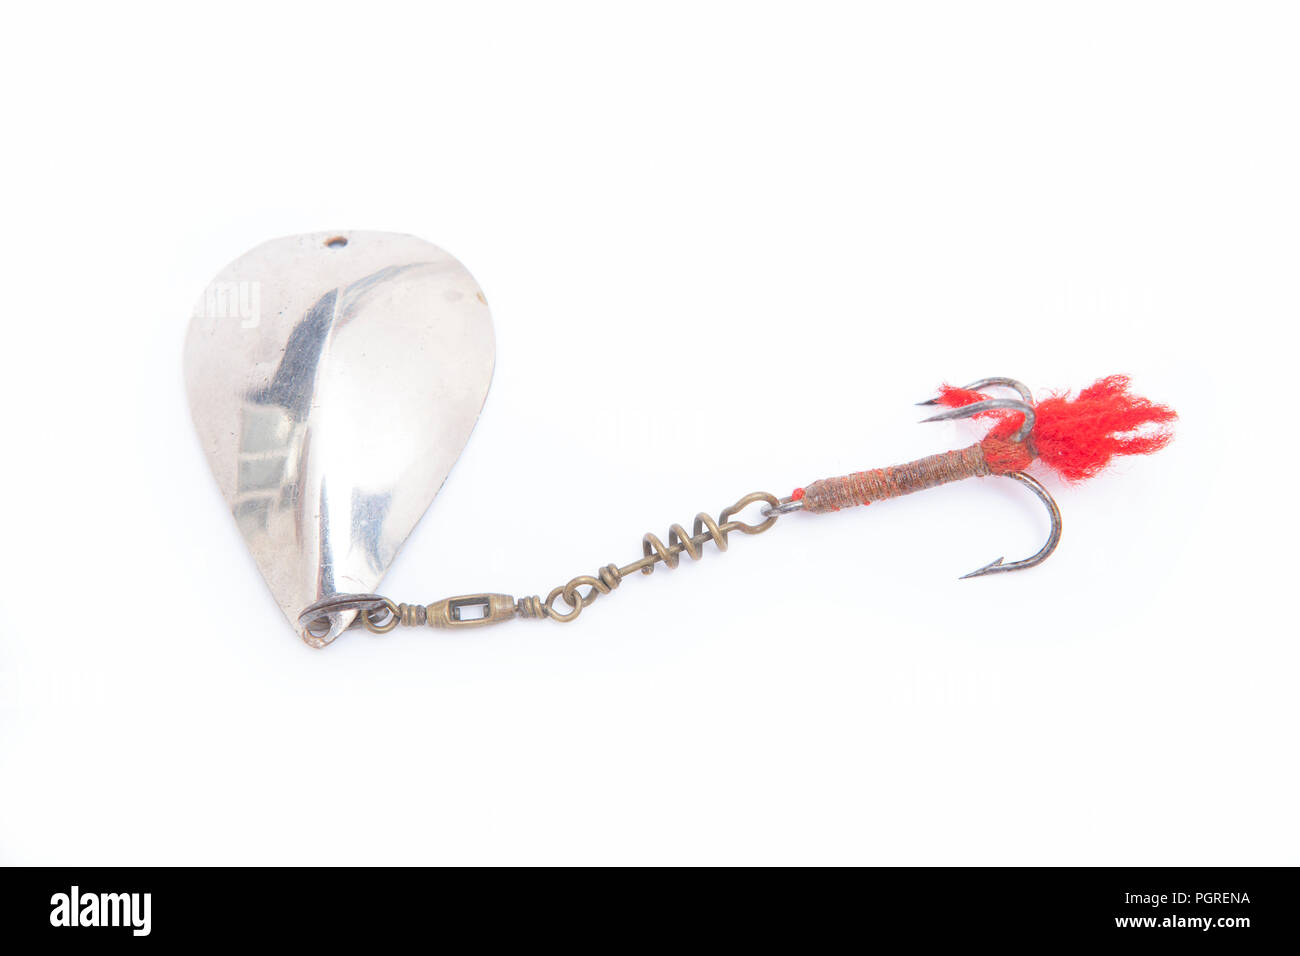 An old metal fishing lure designed for catching predatory fish equipped with a treble hook. From a collection of vintage and modern fishing tackle. No Stock Photo